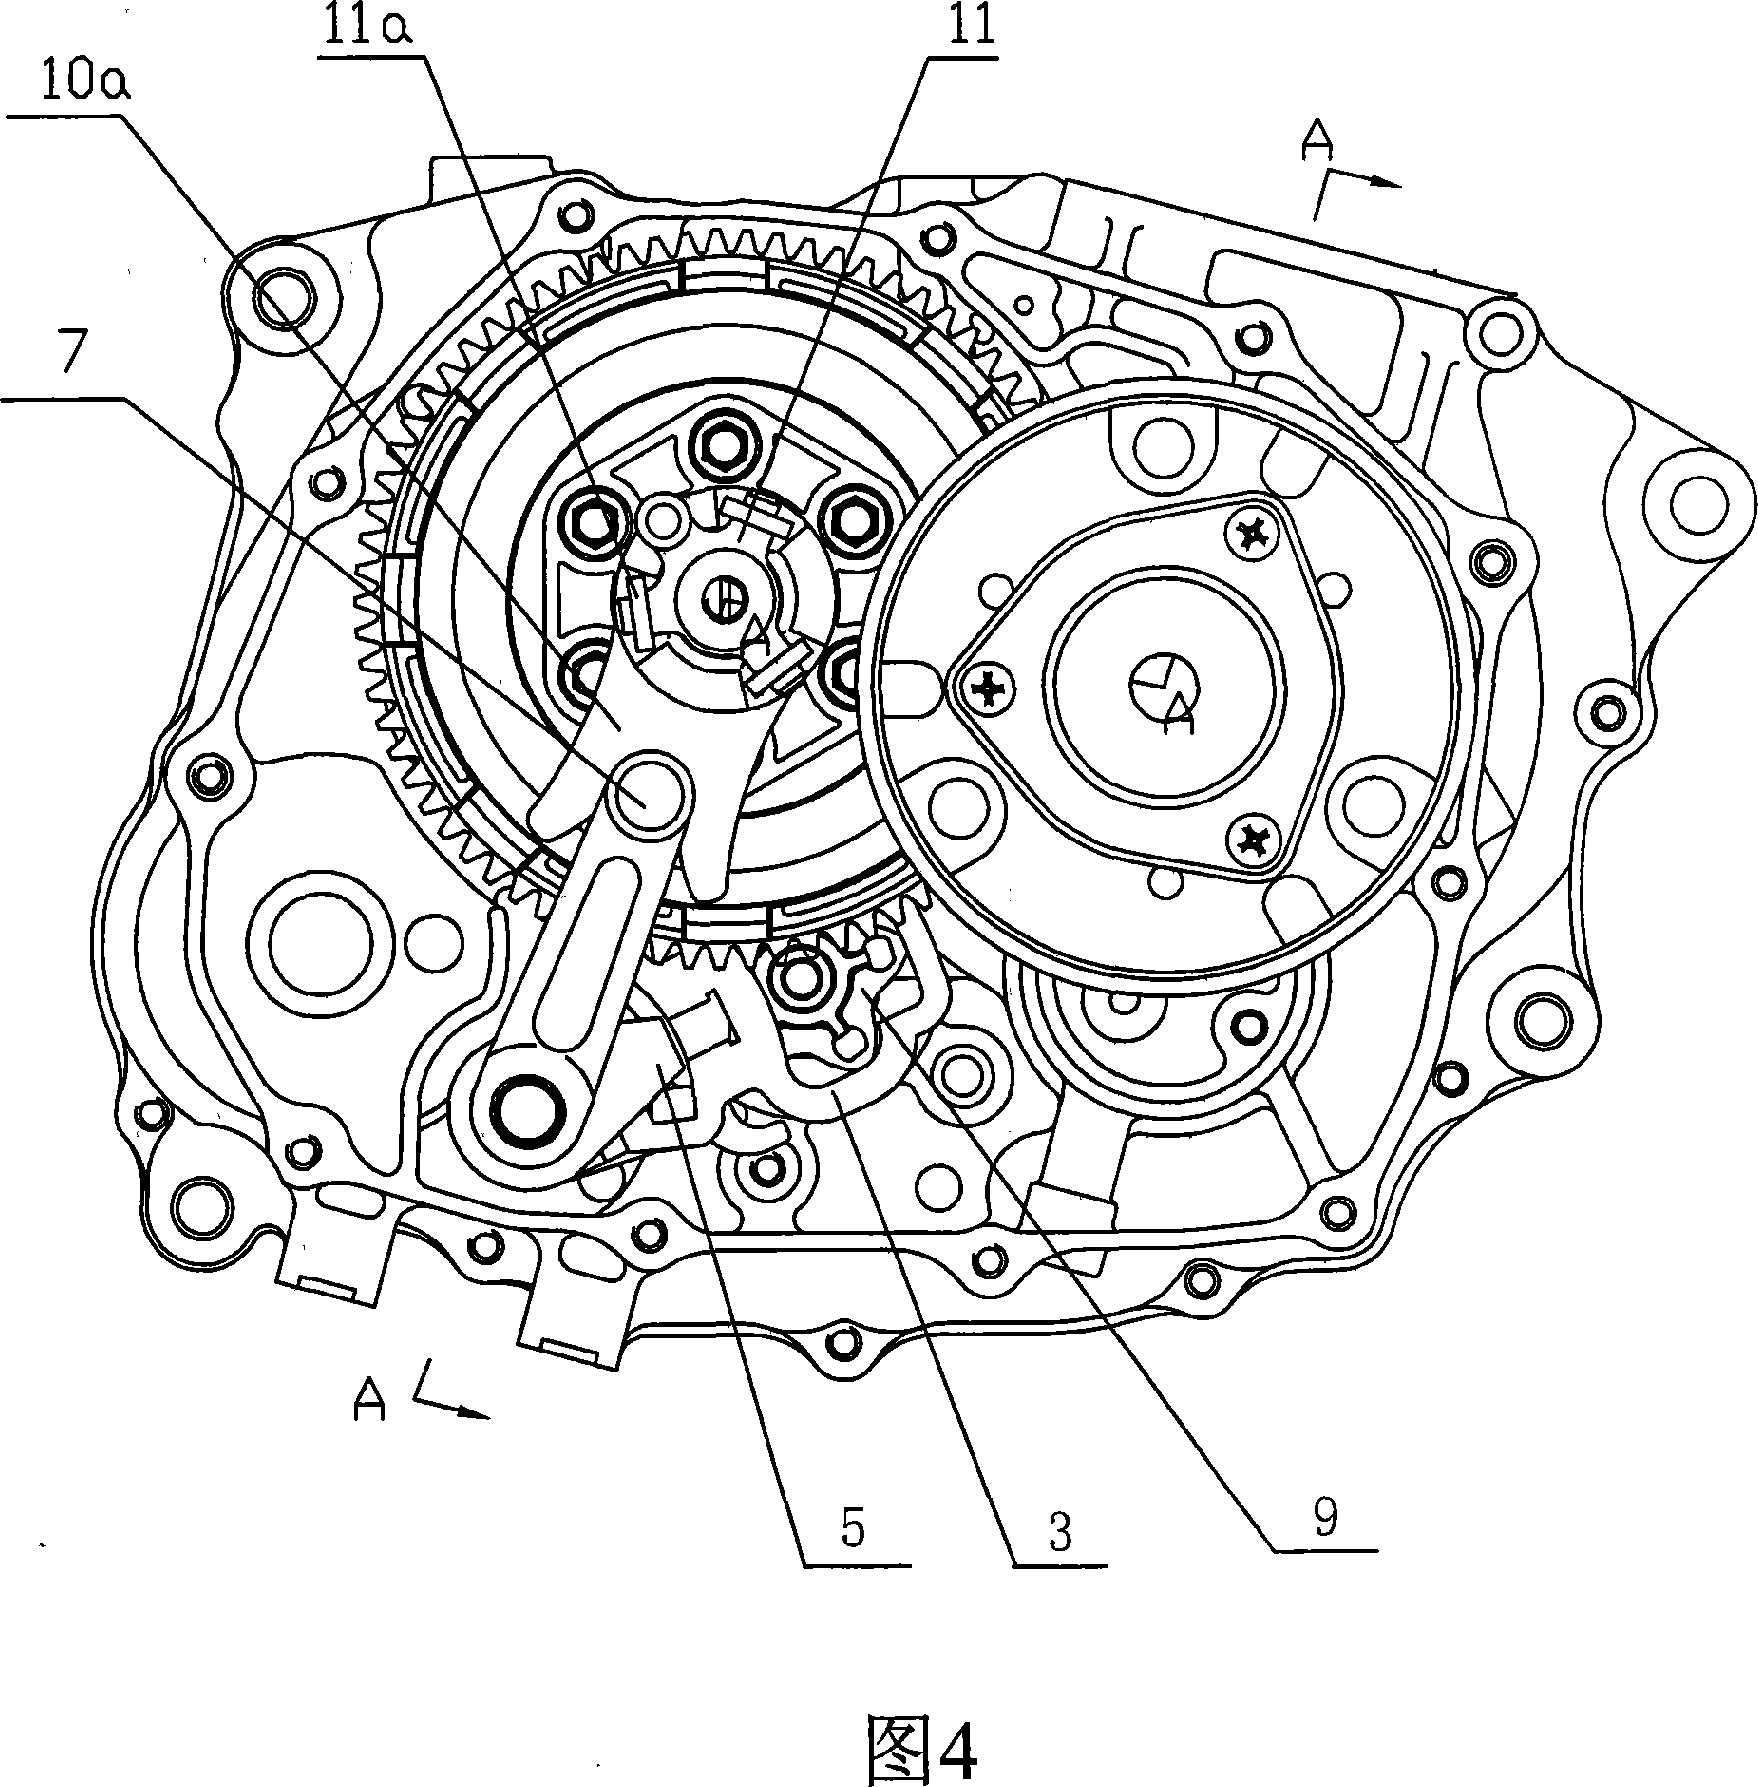 Automatic double-clutch engine gear arm